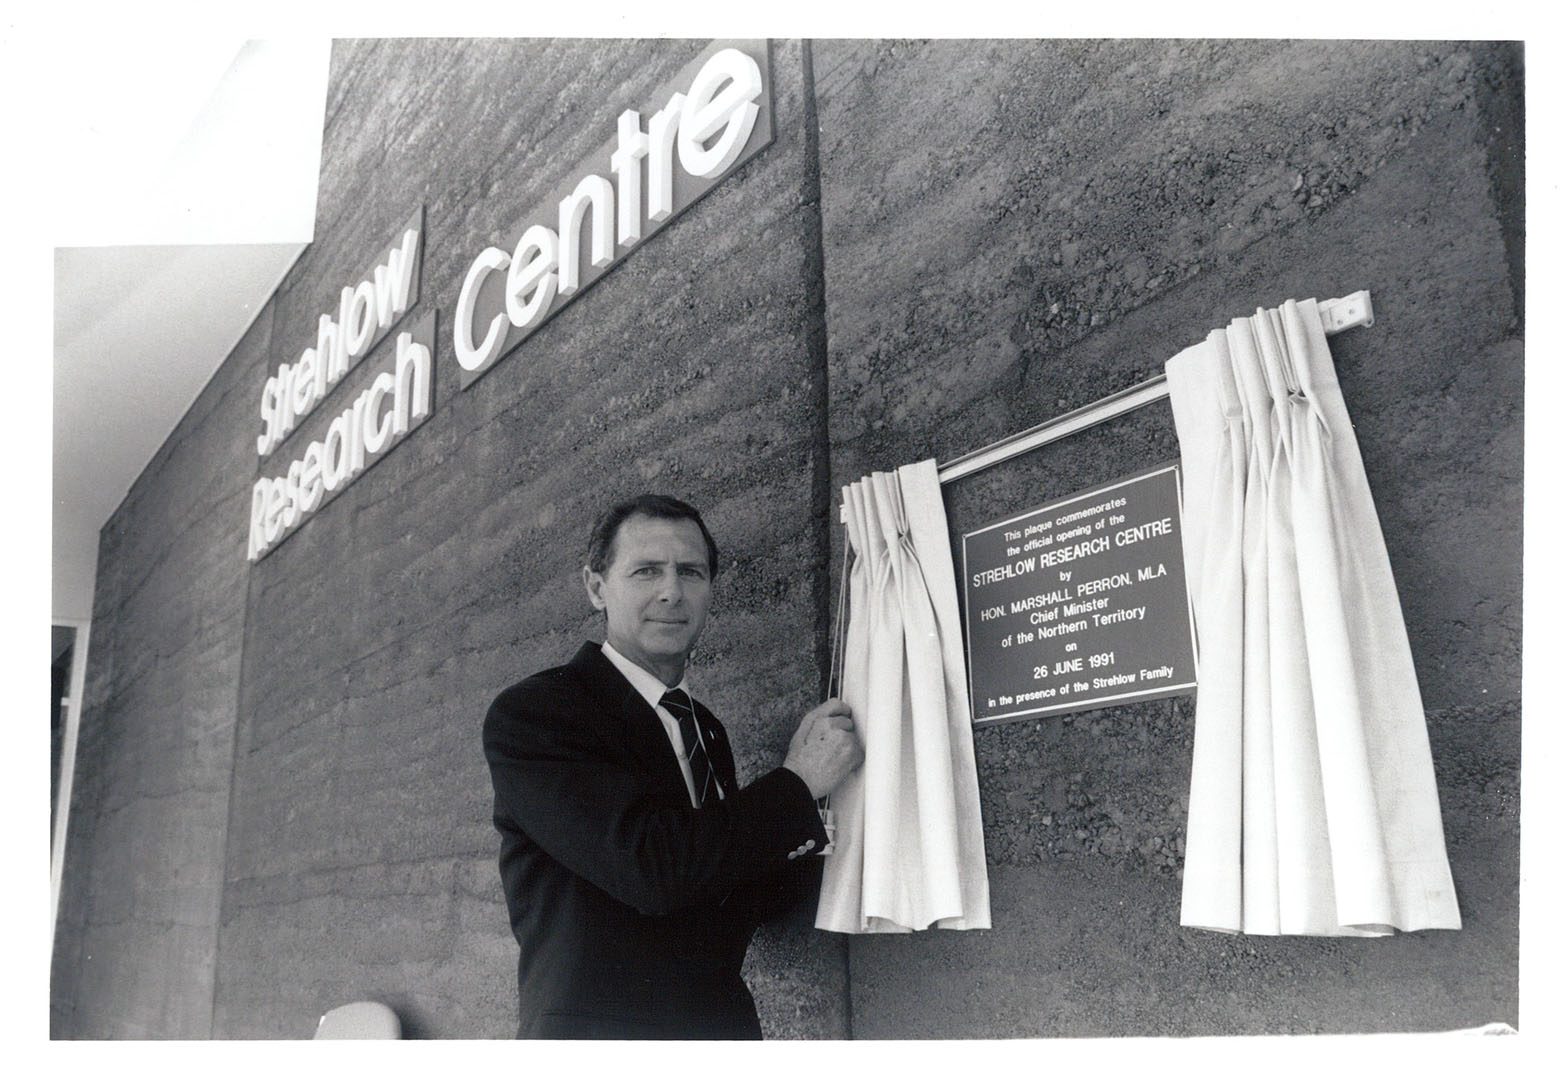 Chief Minister Marshall Perron, Opening of the Strehlow Research Centre, Alice Springs, 26 June 1991<br>Image courtesy of Strehlow Research Centre, Museum and Art Gallery of the NT, Photographer Barry Skipsey.